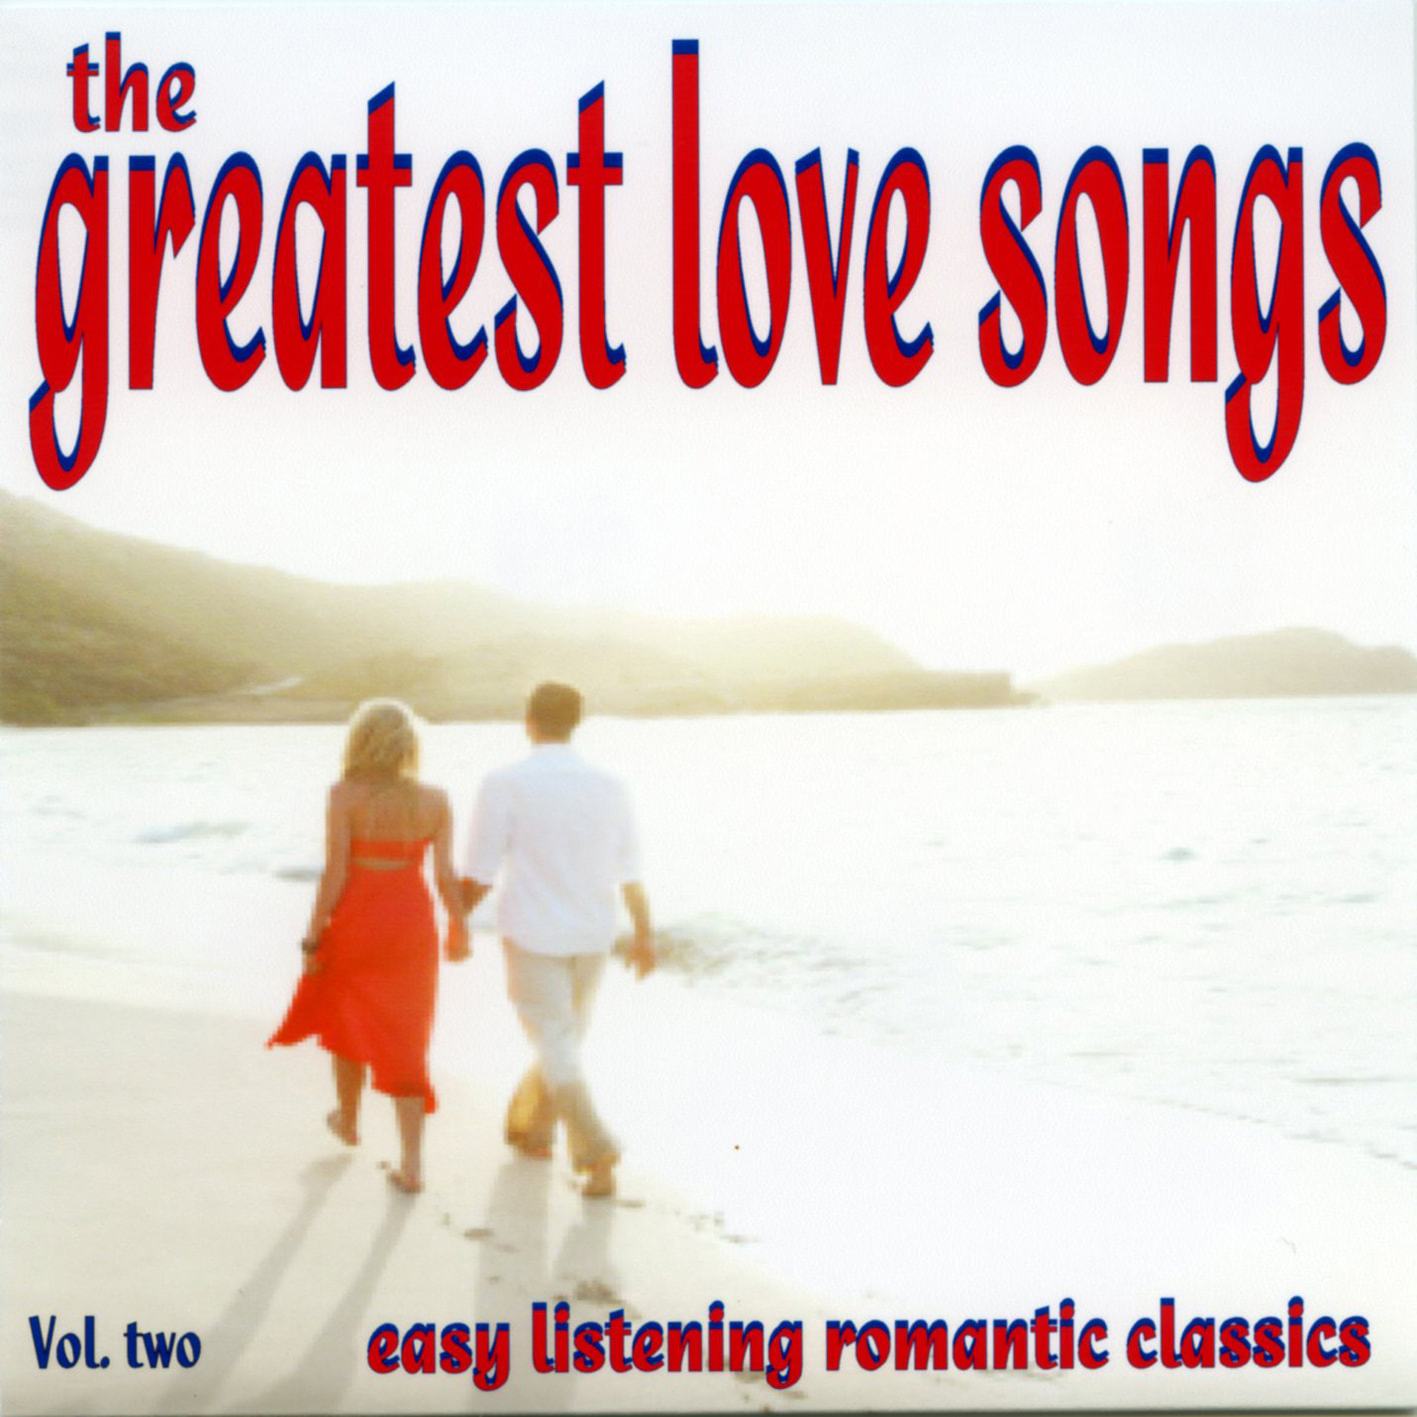 The Greatest Love Songs - Vol. Two